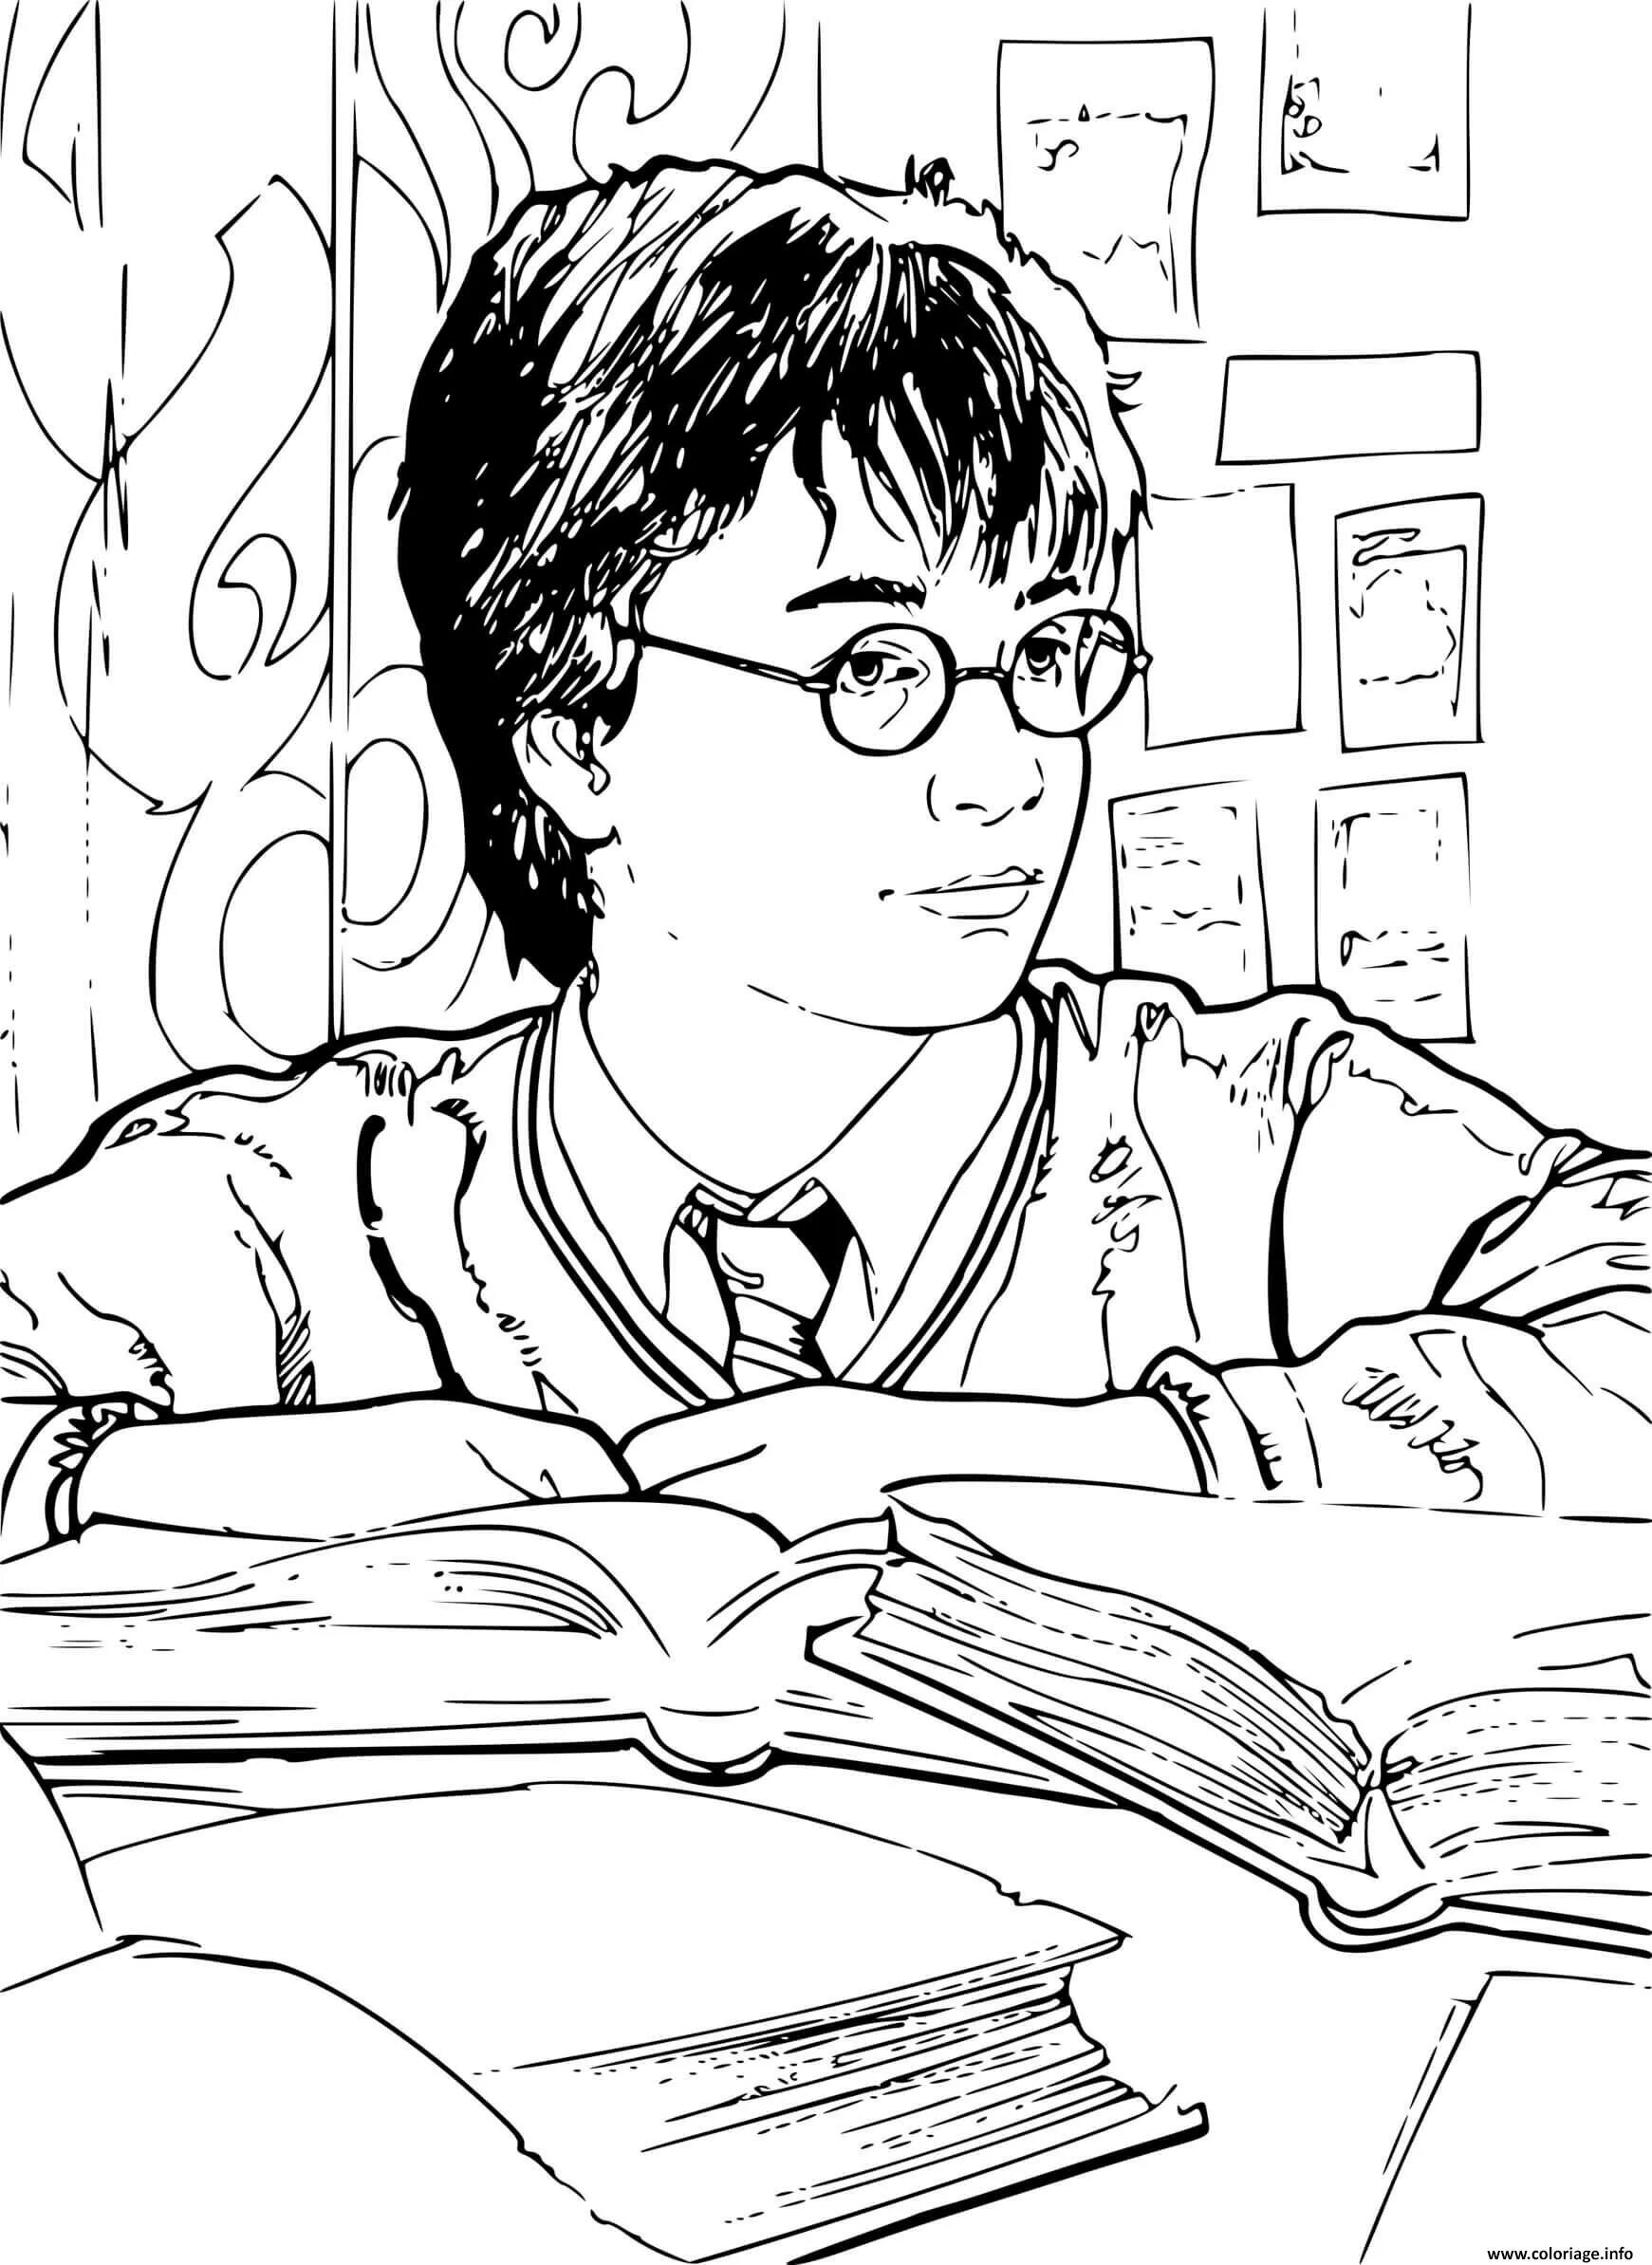 Harry potter drawing #6